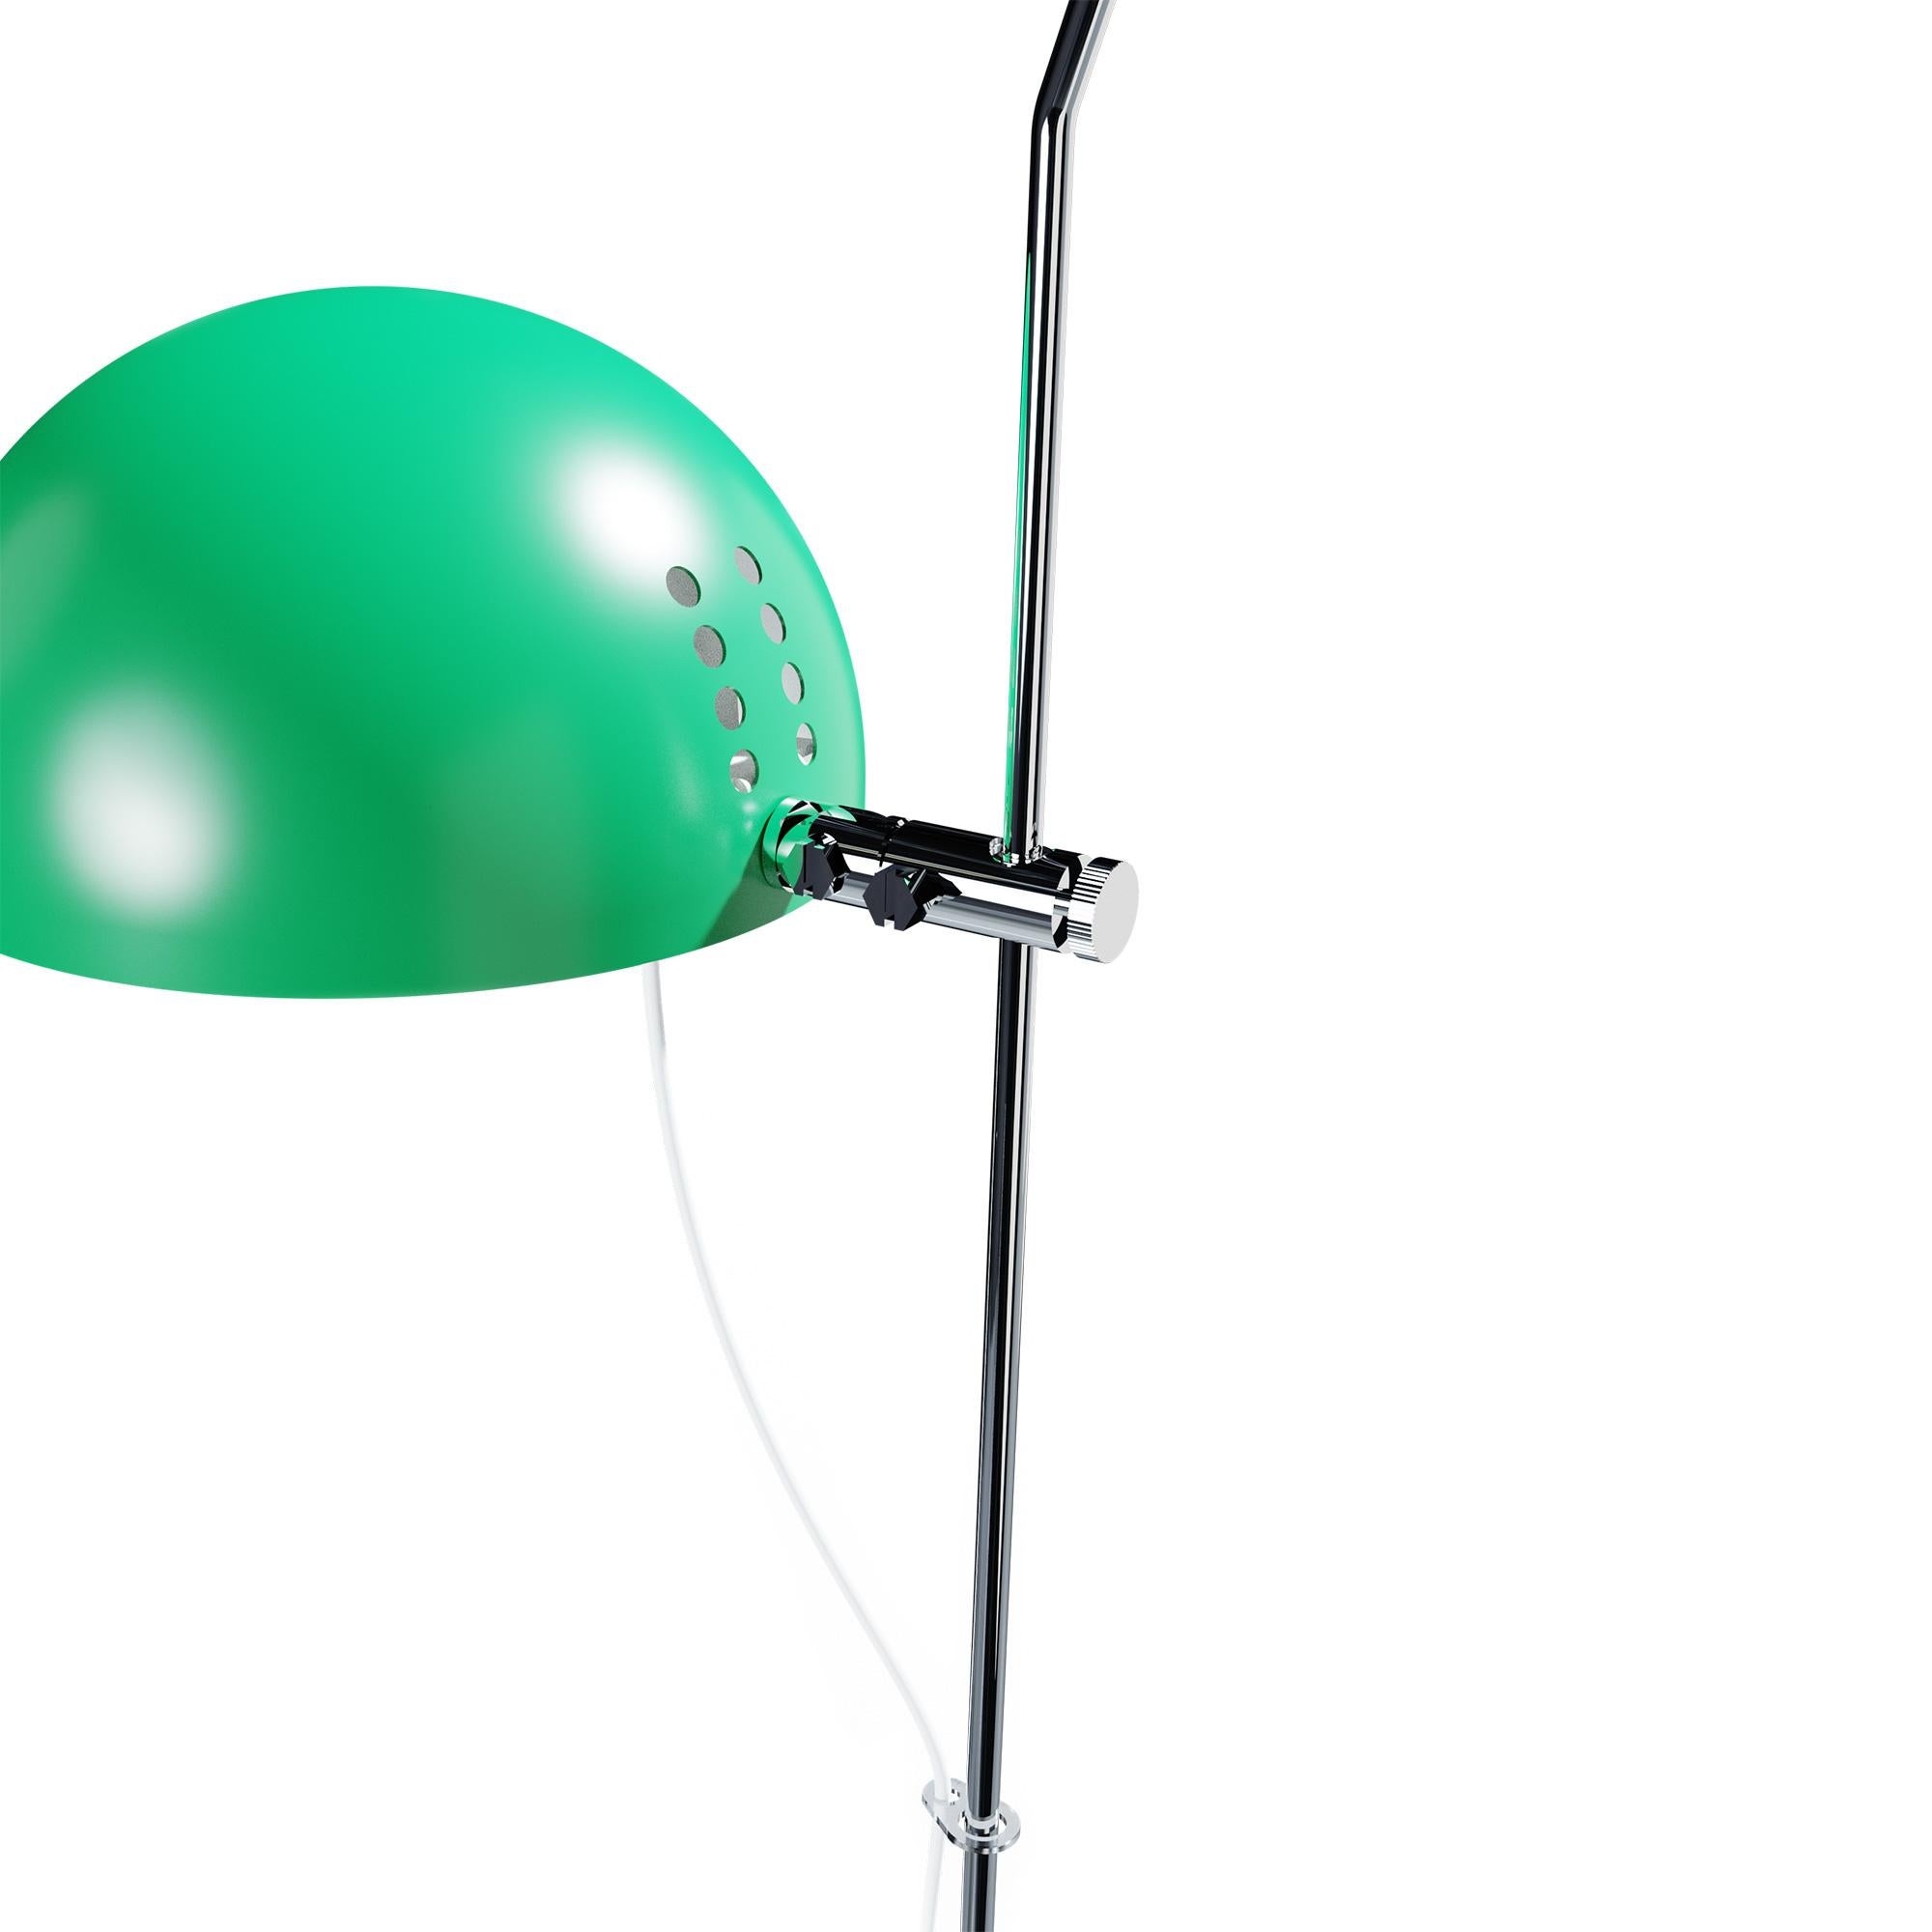 A21 Table Lamp by Disderot
Limited Edition. 
Designed by Alain Richard
Dimensions: Ø 40 x H 62 cm.
Materials: Lacquered metal.

Delivered with authentication certificate. Made in France. Available in different colored metal options. Custom options